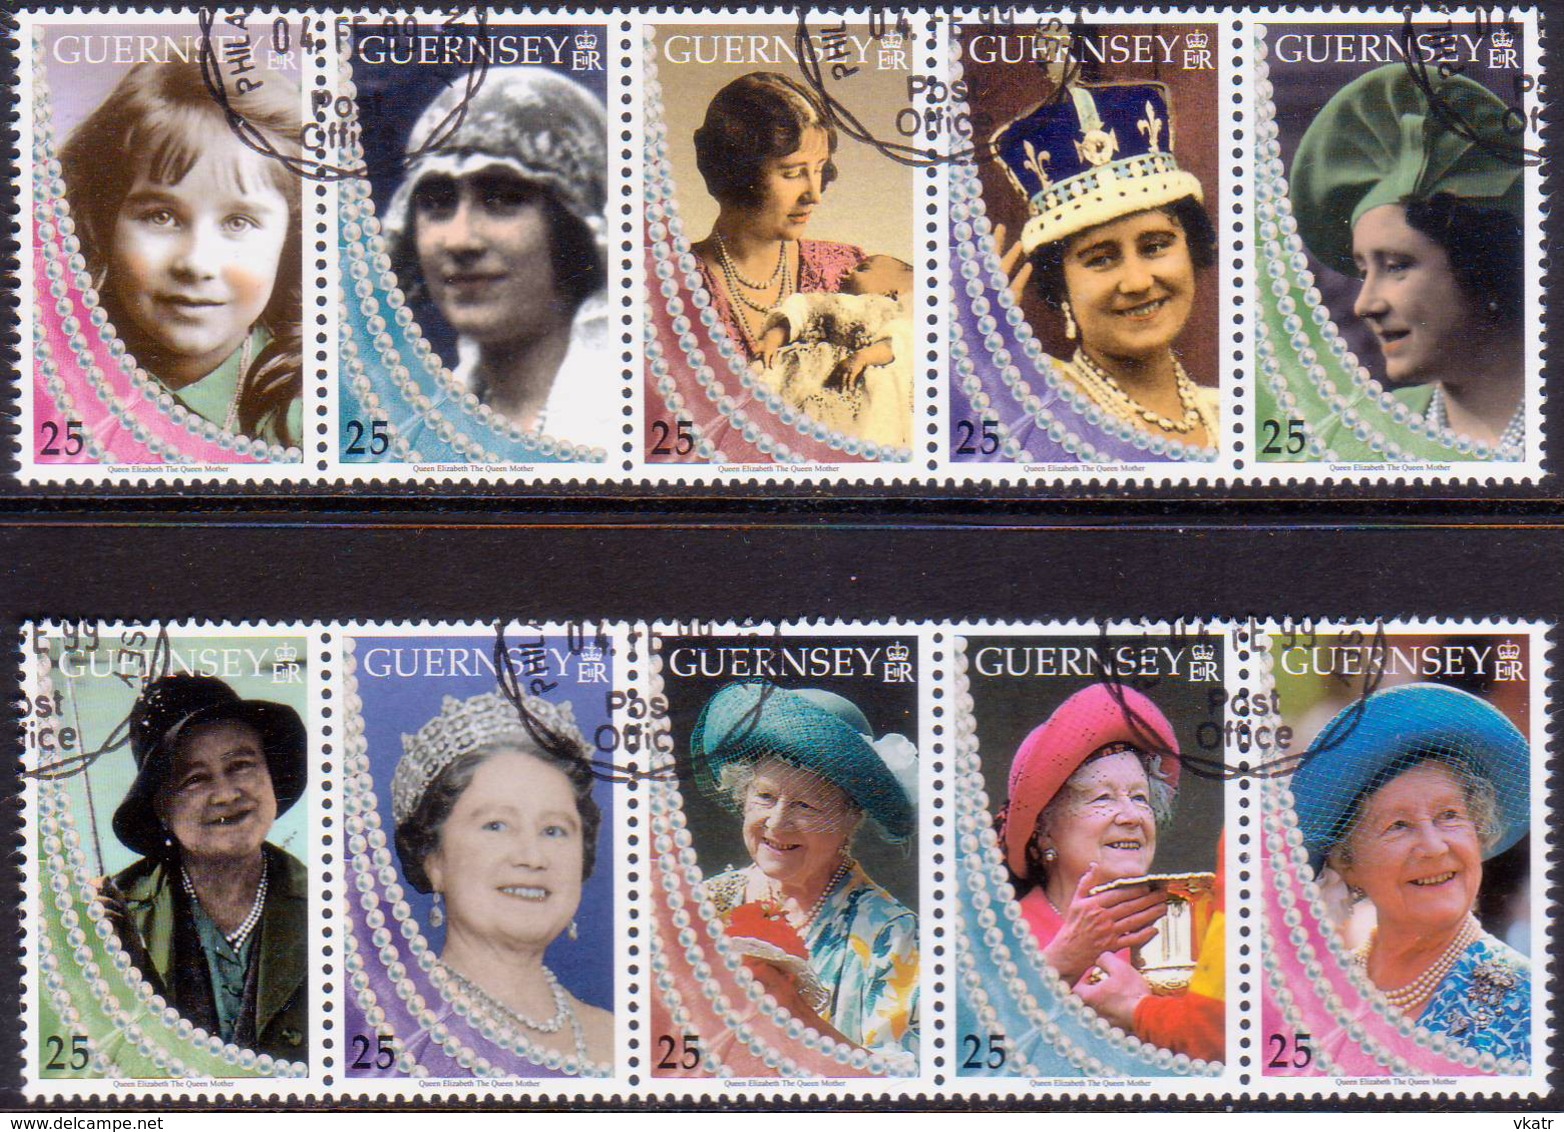 GUERNSEY 1999 SG 817-26 Compl.set In Two Strips Of 5 Used Queen Mother - Guernsey